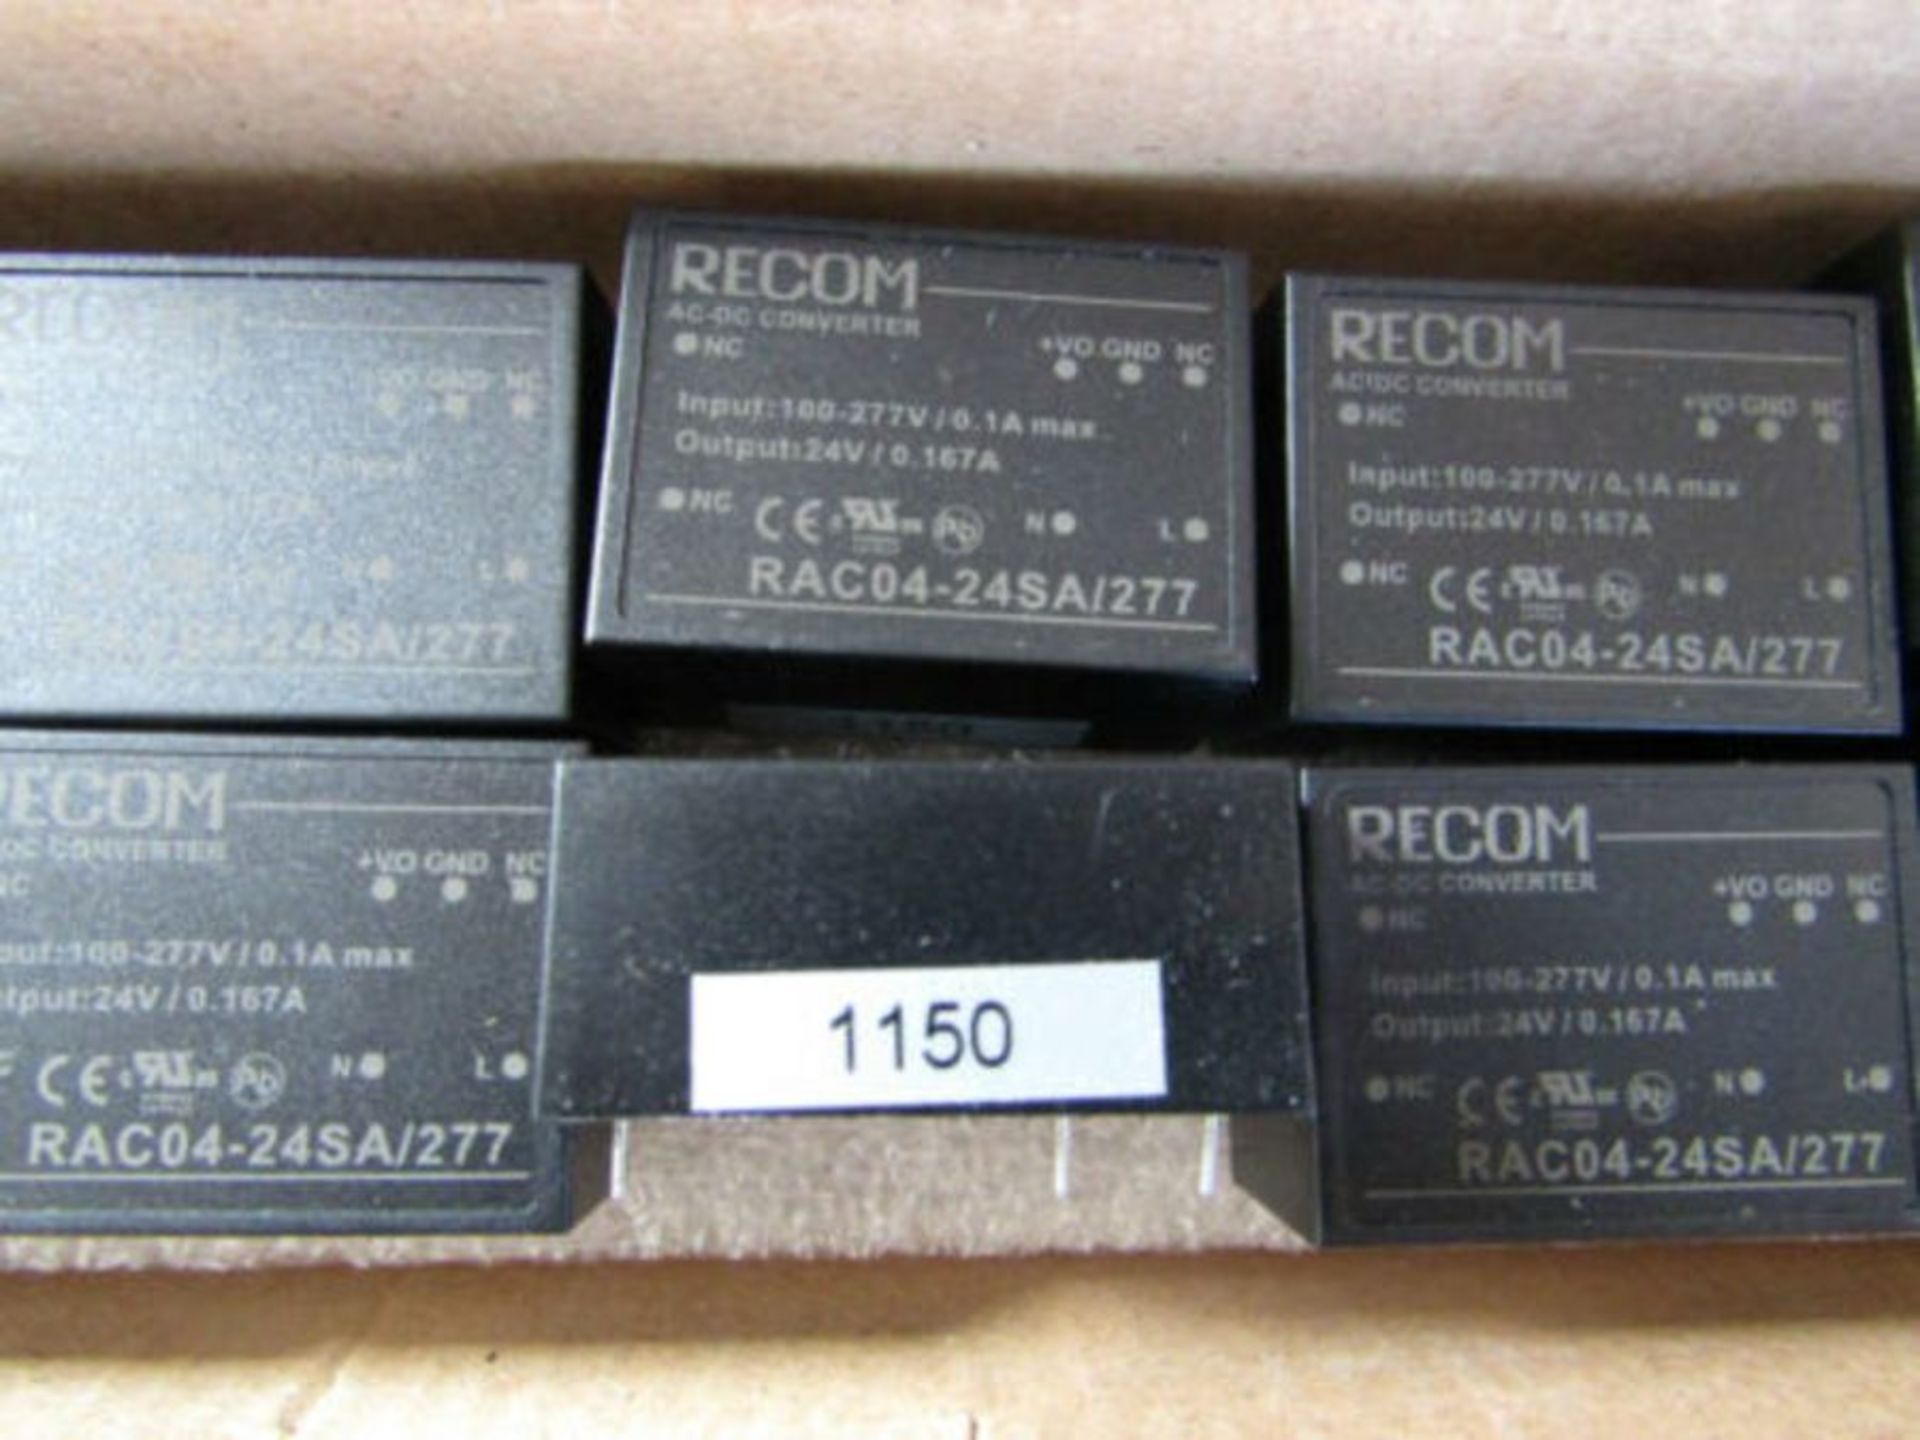 Over 330 Recom Embedded SMPS Power Supplies - cost price £10 each